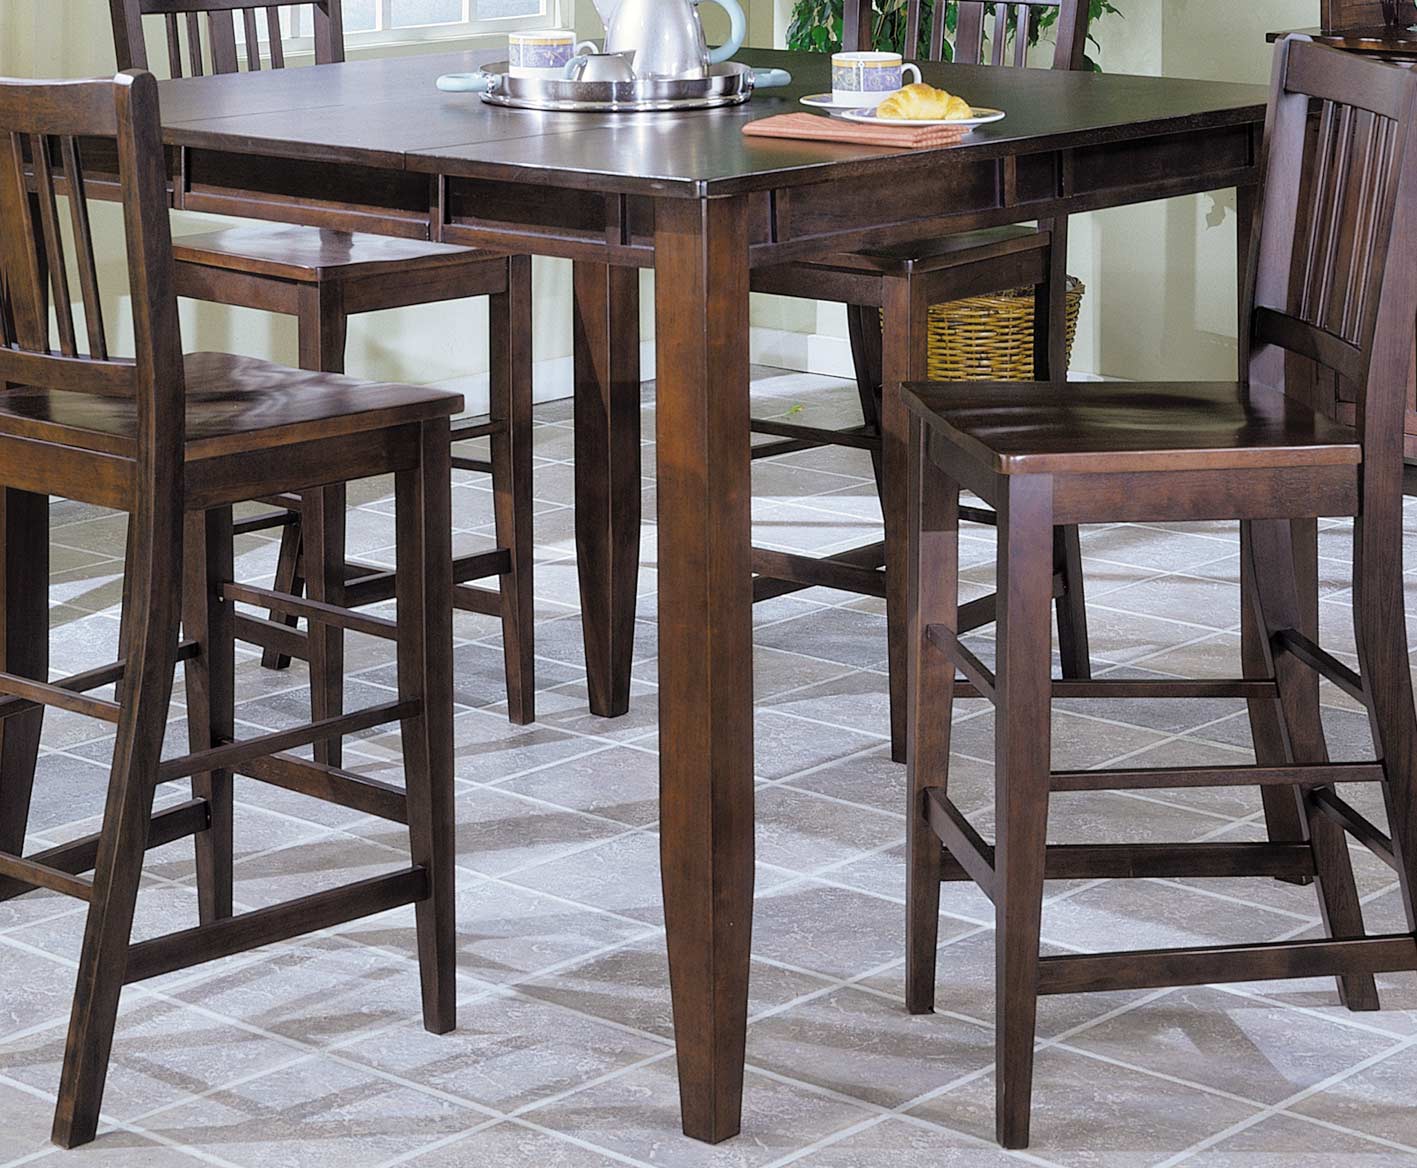 Homelegance Market Square Pub Dining Table wth Butterfly Leaf Extension